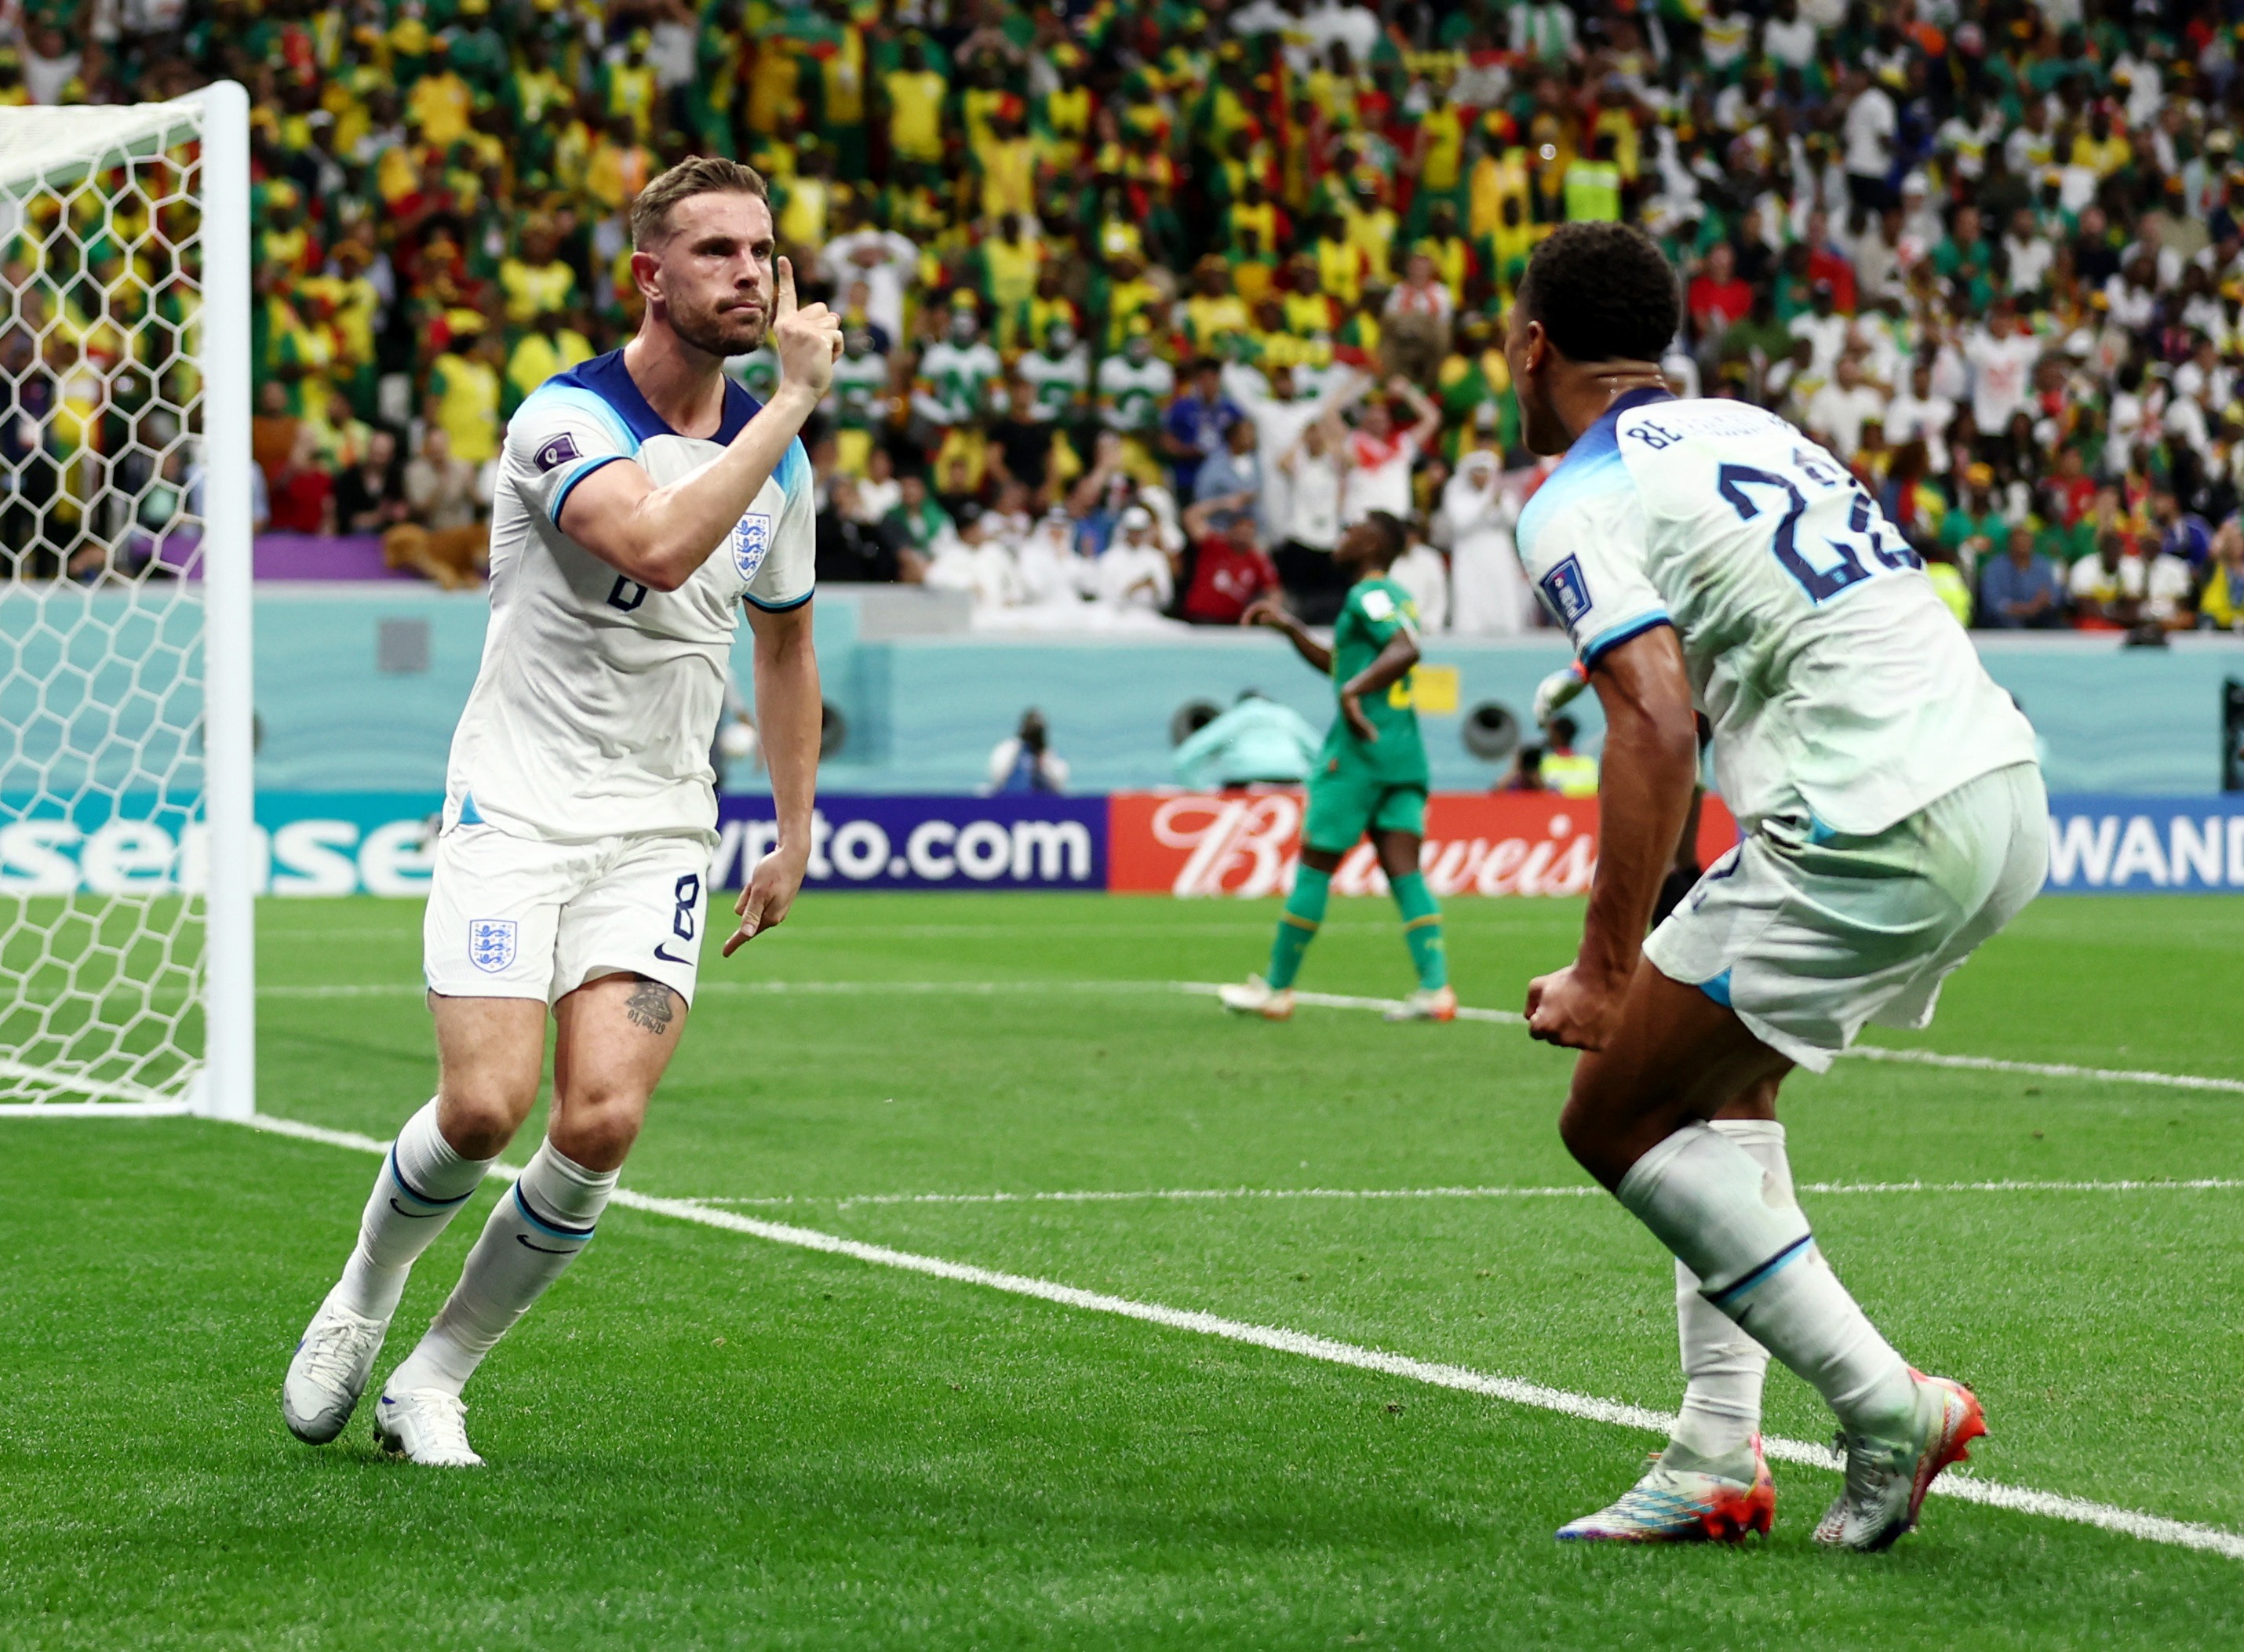 , England 3 Senegal 0: Rampant Three Lions to face fearsome France in World Cup quarter-finals as Kane scores in rout